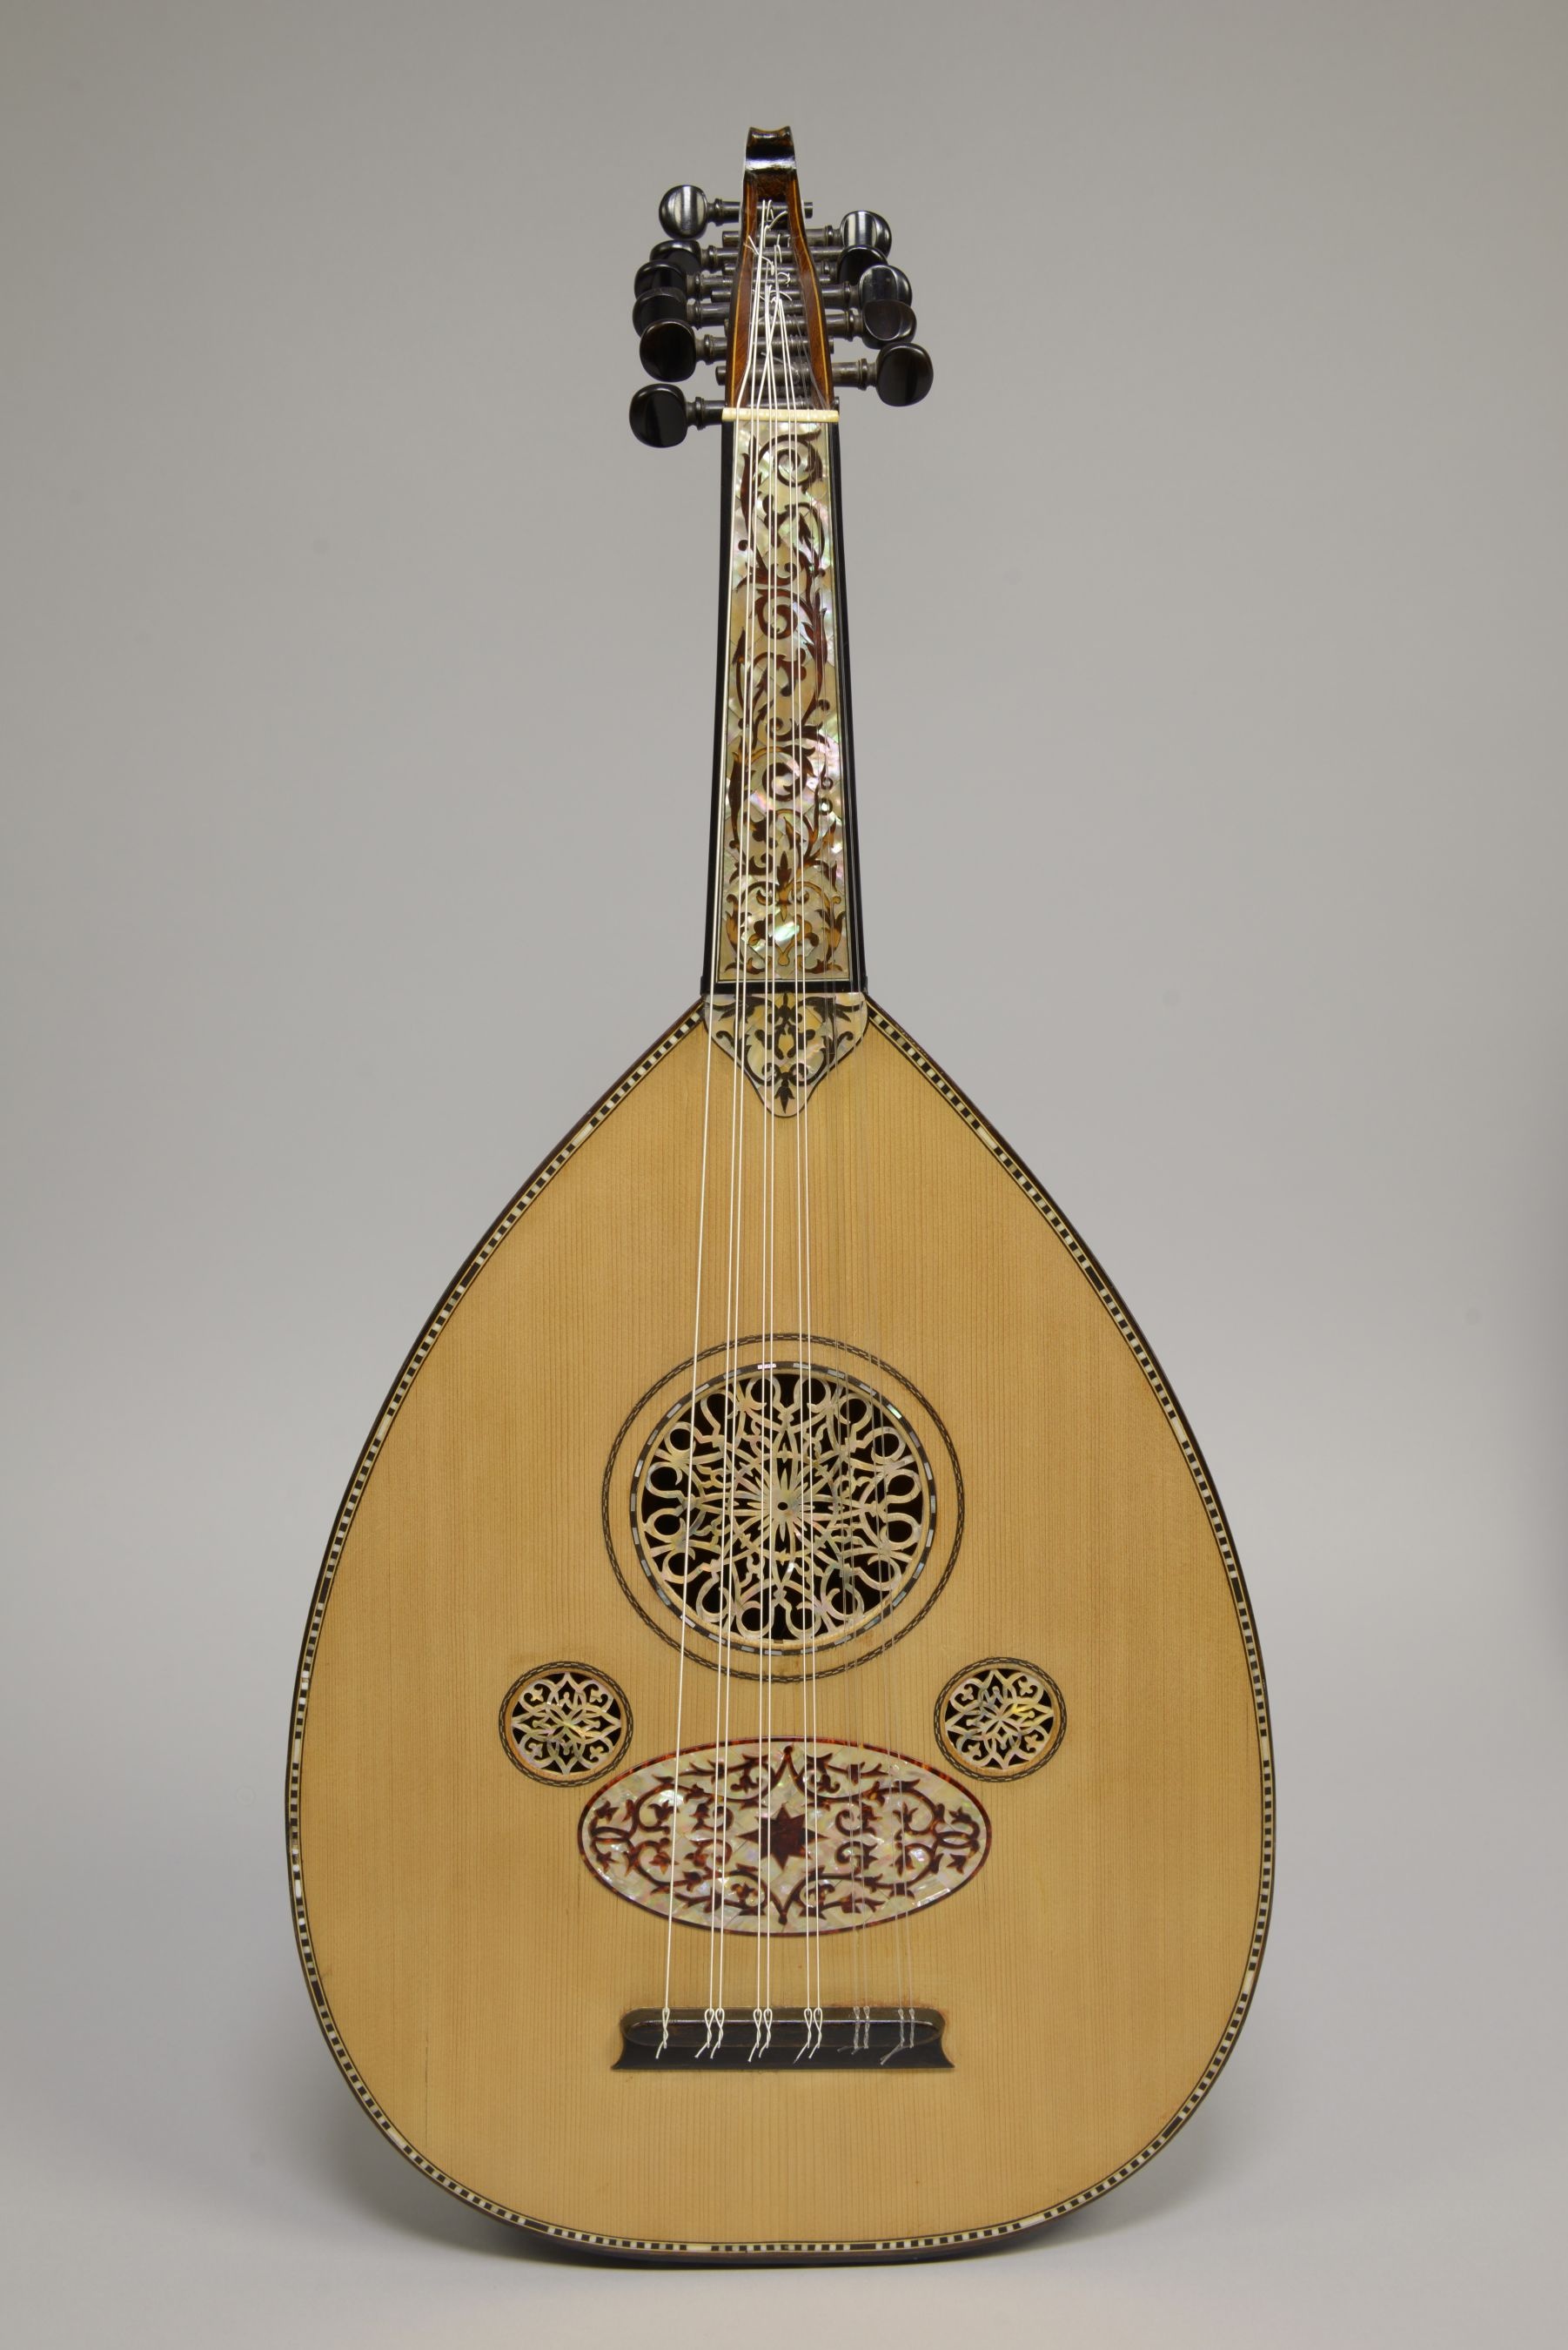 Lute: Oud, Pear-Shaped Stringed Instrument, Widely Used In Middle Eastern Music, Wooden. 1810x2700 HD Background.